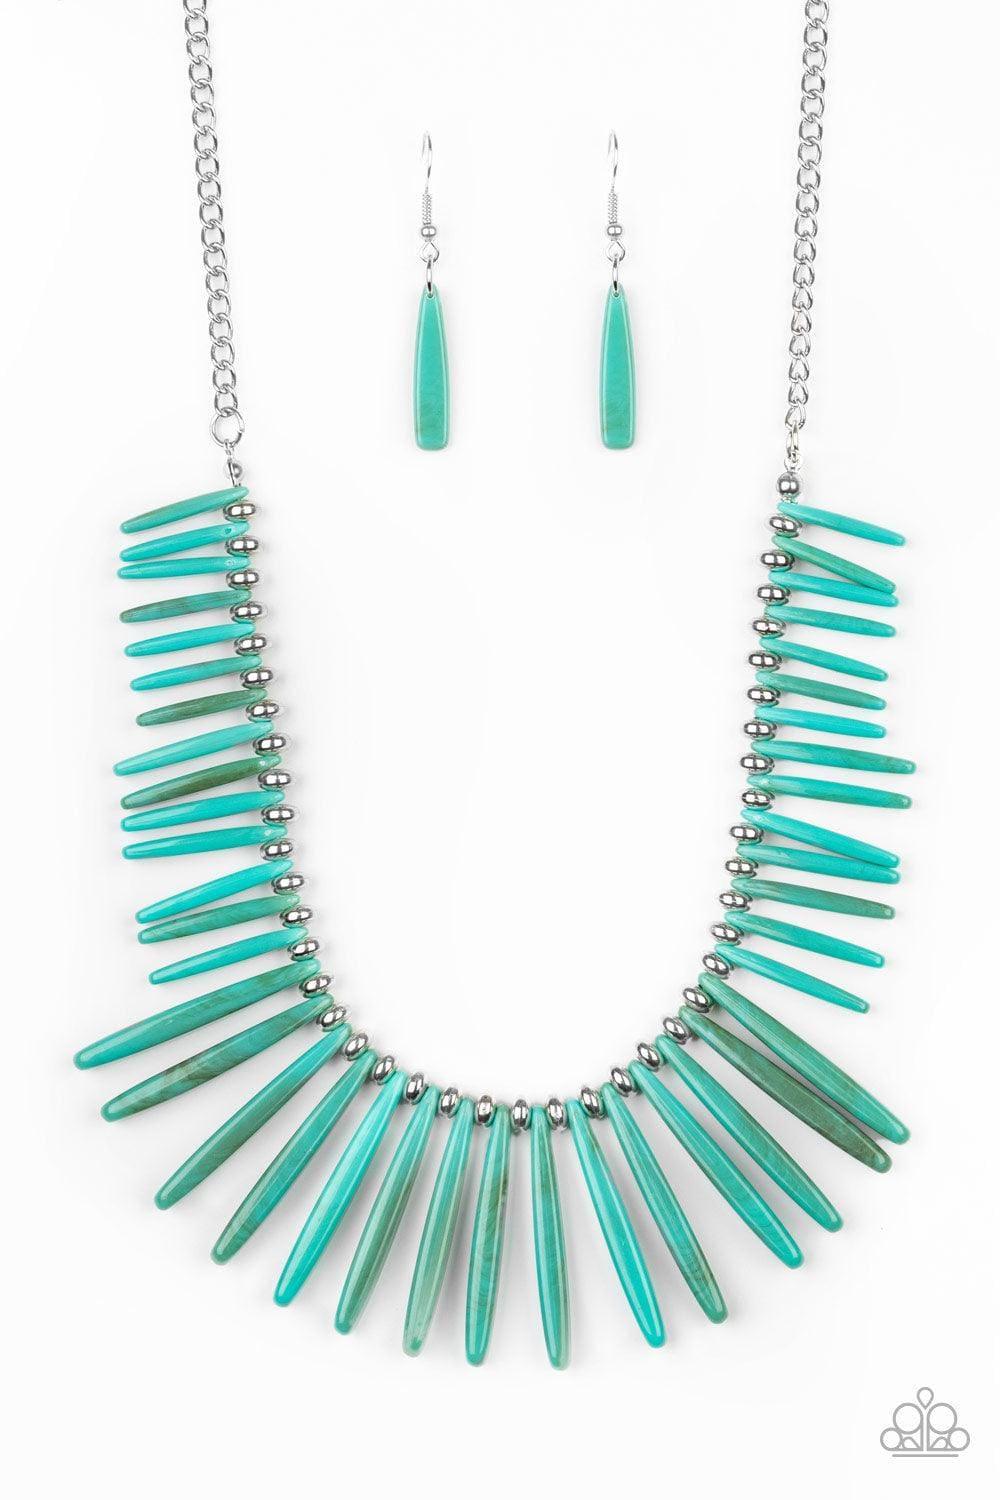 Paparazzi Accessories - Out Of My Element - Blue Turquoise Necklace - Bling by JessieK